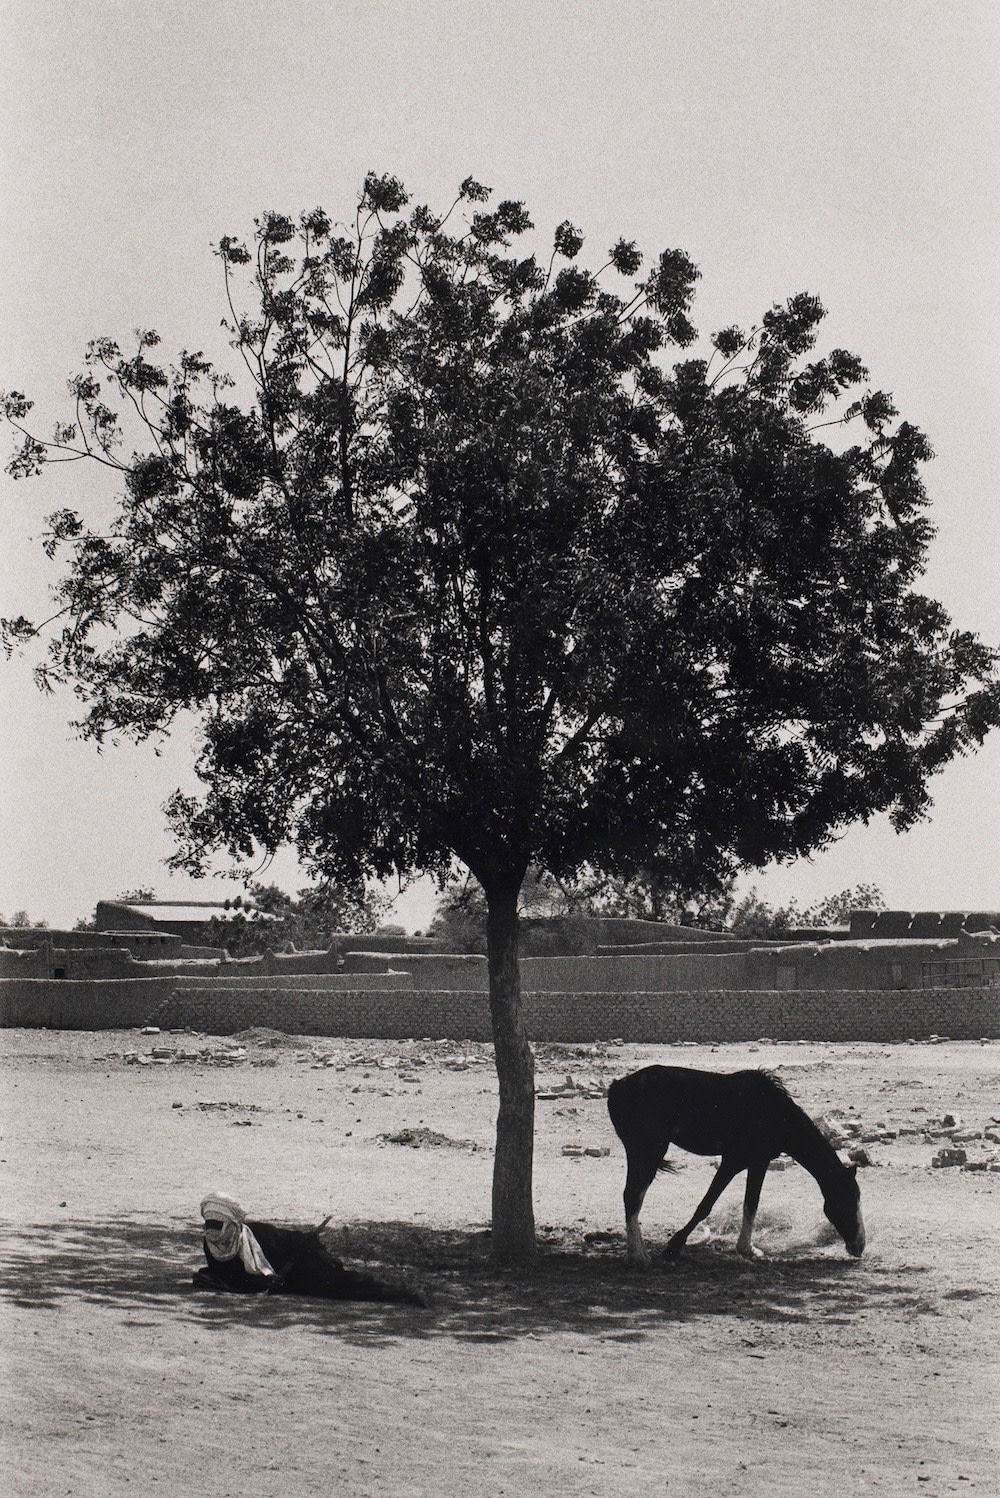 Bernard Plossu (1945-)  Untitled, from the series &quot;African Desert&quot;, 1975  Gelatin silver print  16 x 12 inches (paper), black and white photography